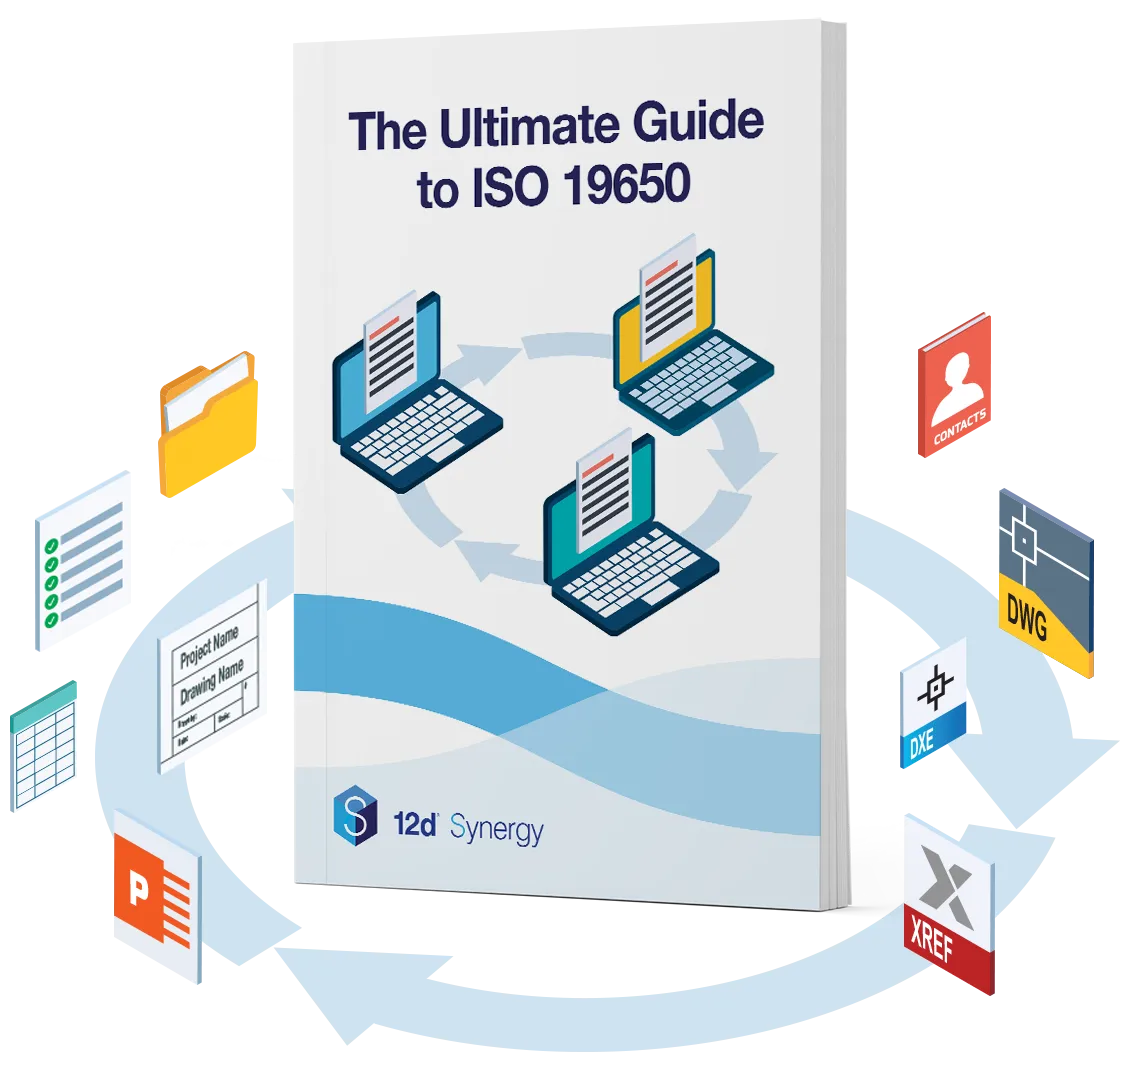 The Ultimate Guide to ISO 19650 book cover